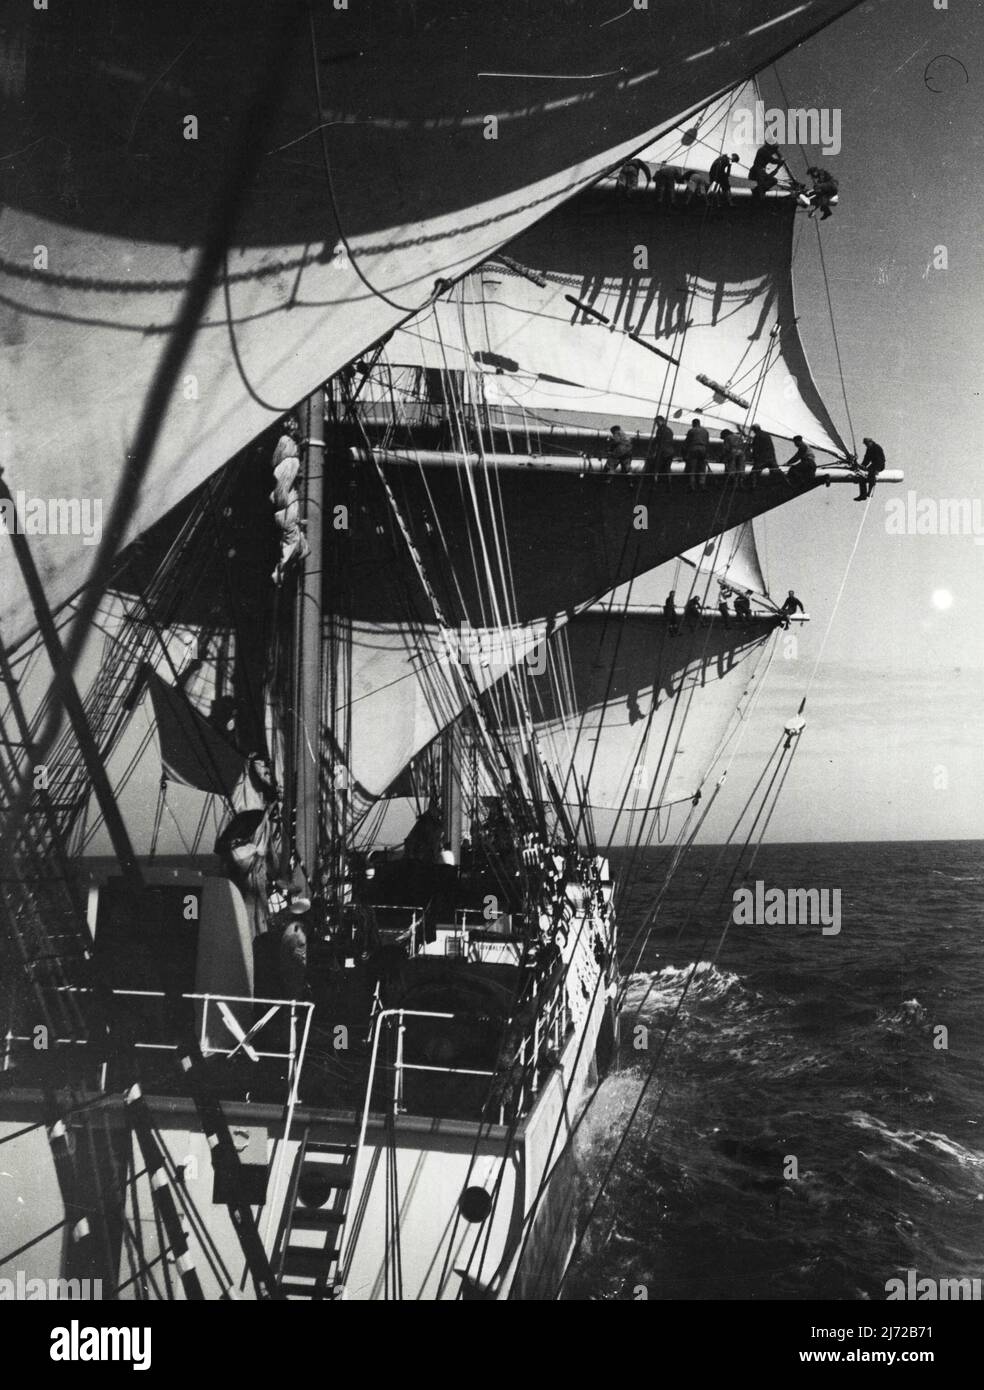 Aboard A Windjammer -- Members of the crew rigging was taken from a lifeboat slung out from the side specially for the photographer. Special photograph taken aboard the four-masted barque Abraham Rydberg winner of the race from Australia, as she set sail from Falmouth to complete her voyage to Ipswish. May 7, 1934. (Photo by London News Agency Photos Ltd.) Stock Photo